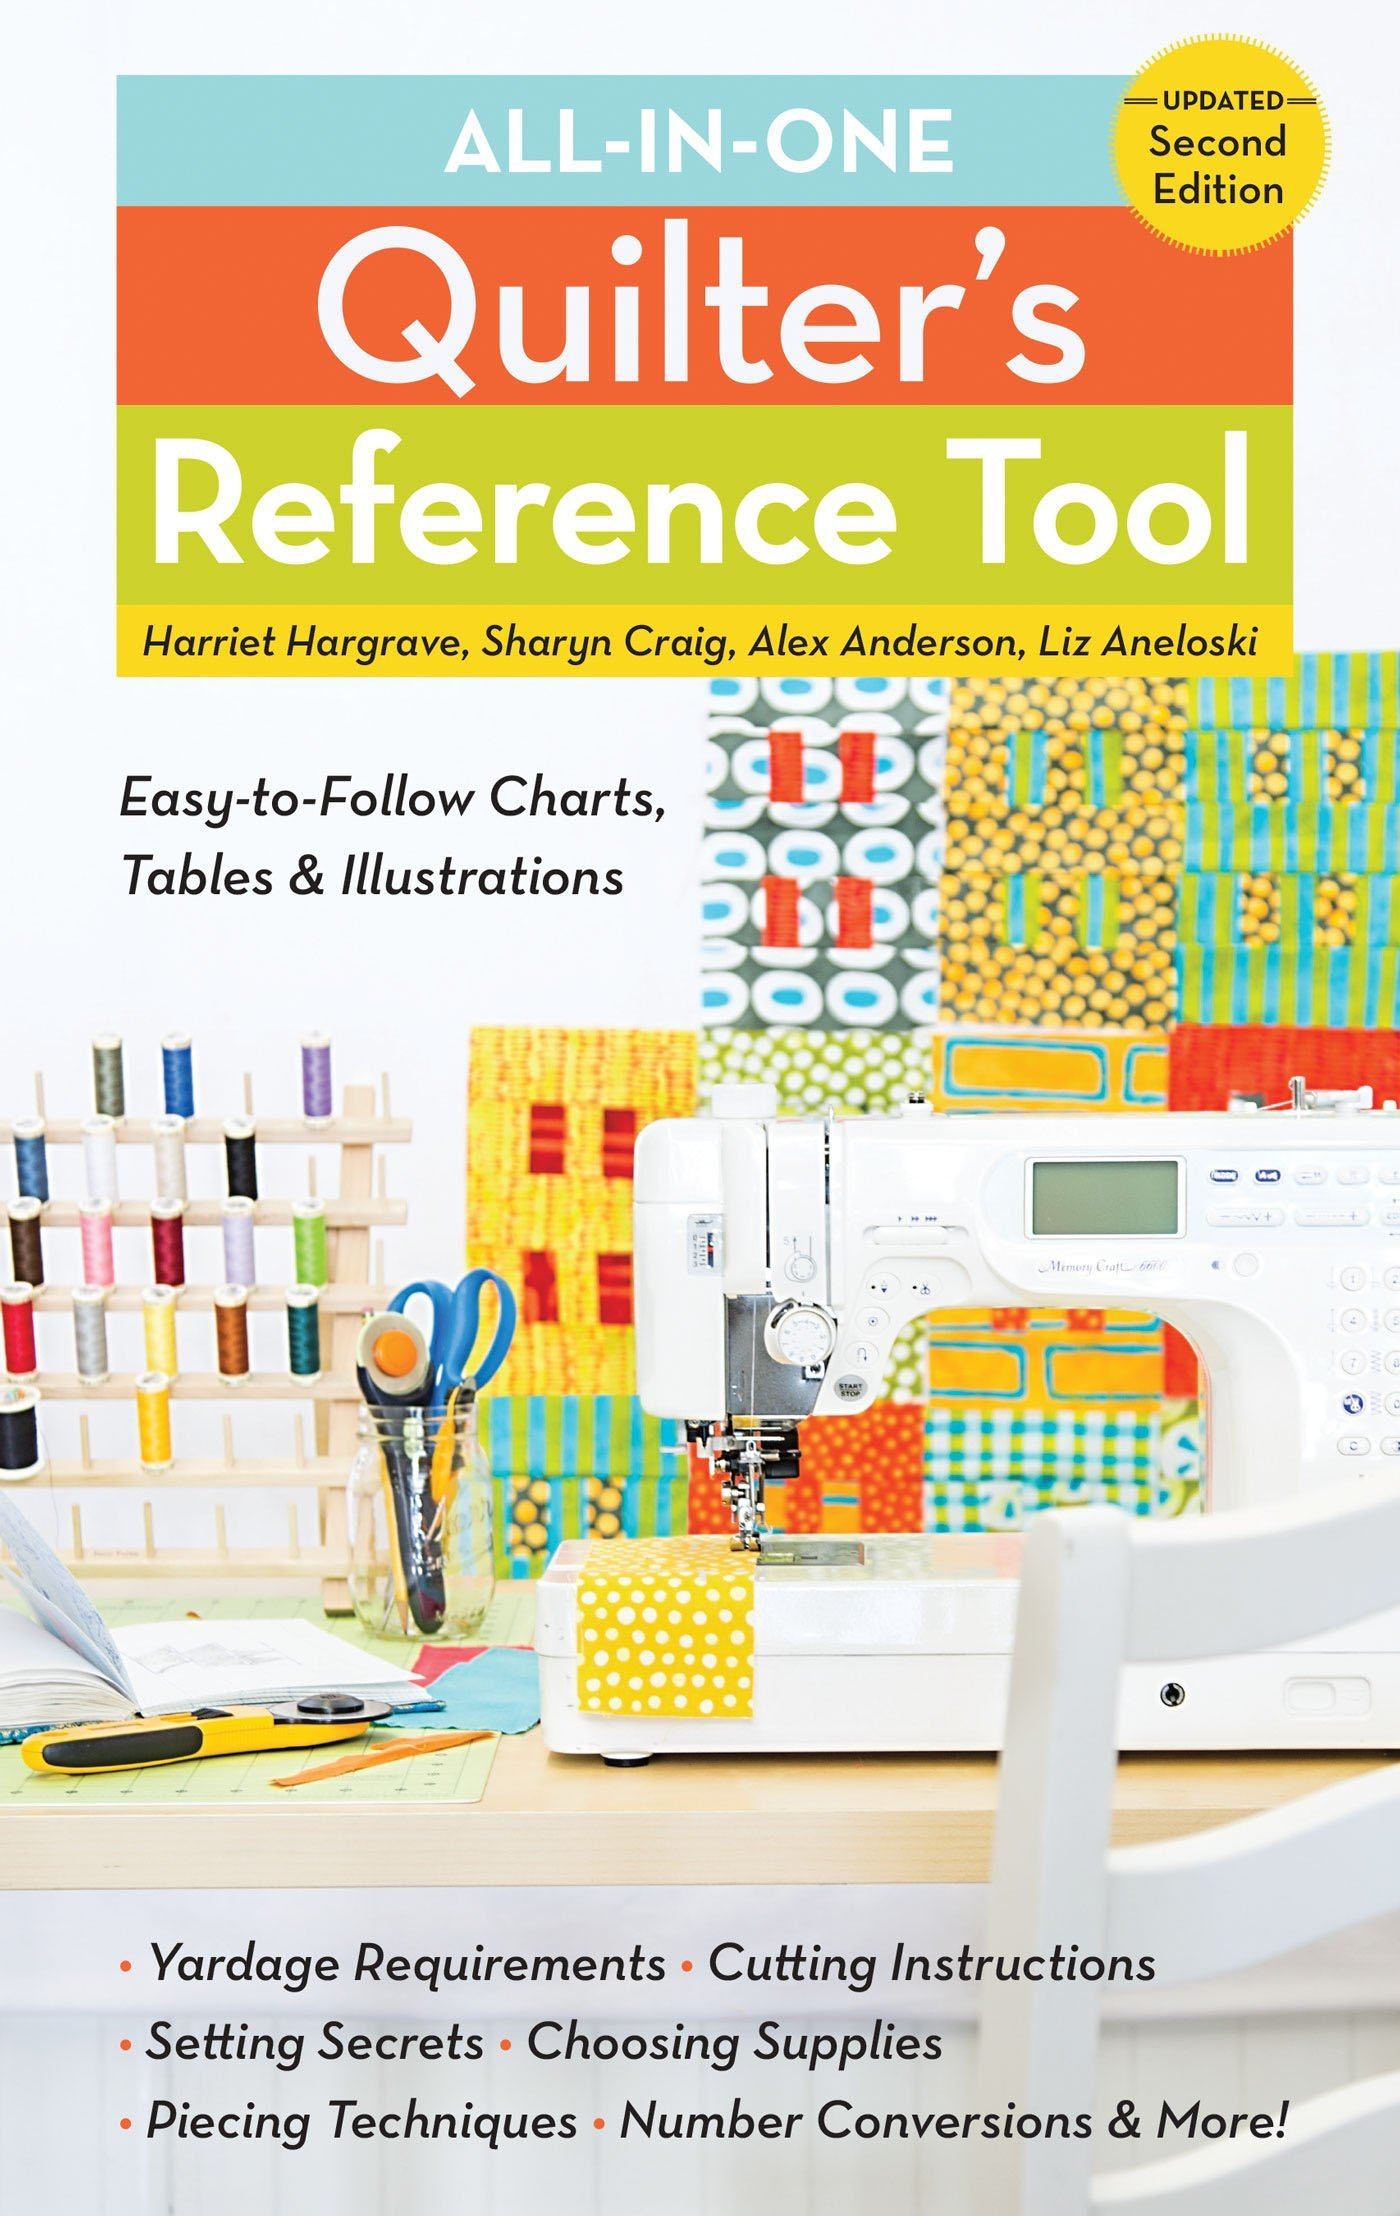 All-in-One Quilter’s Reference Tool: Updated Spiral-bound